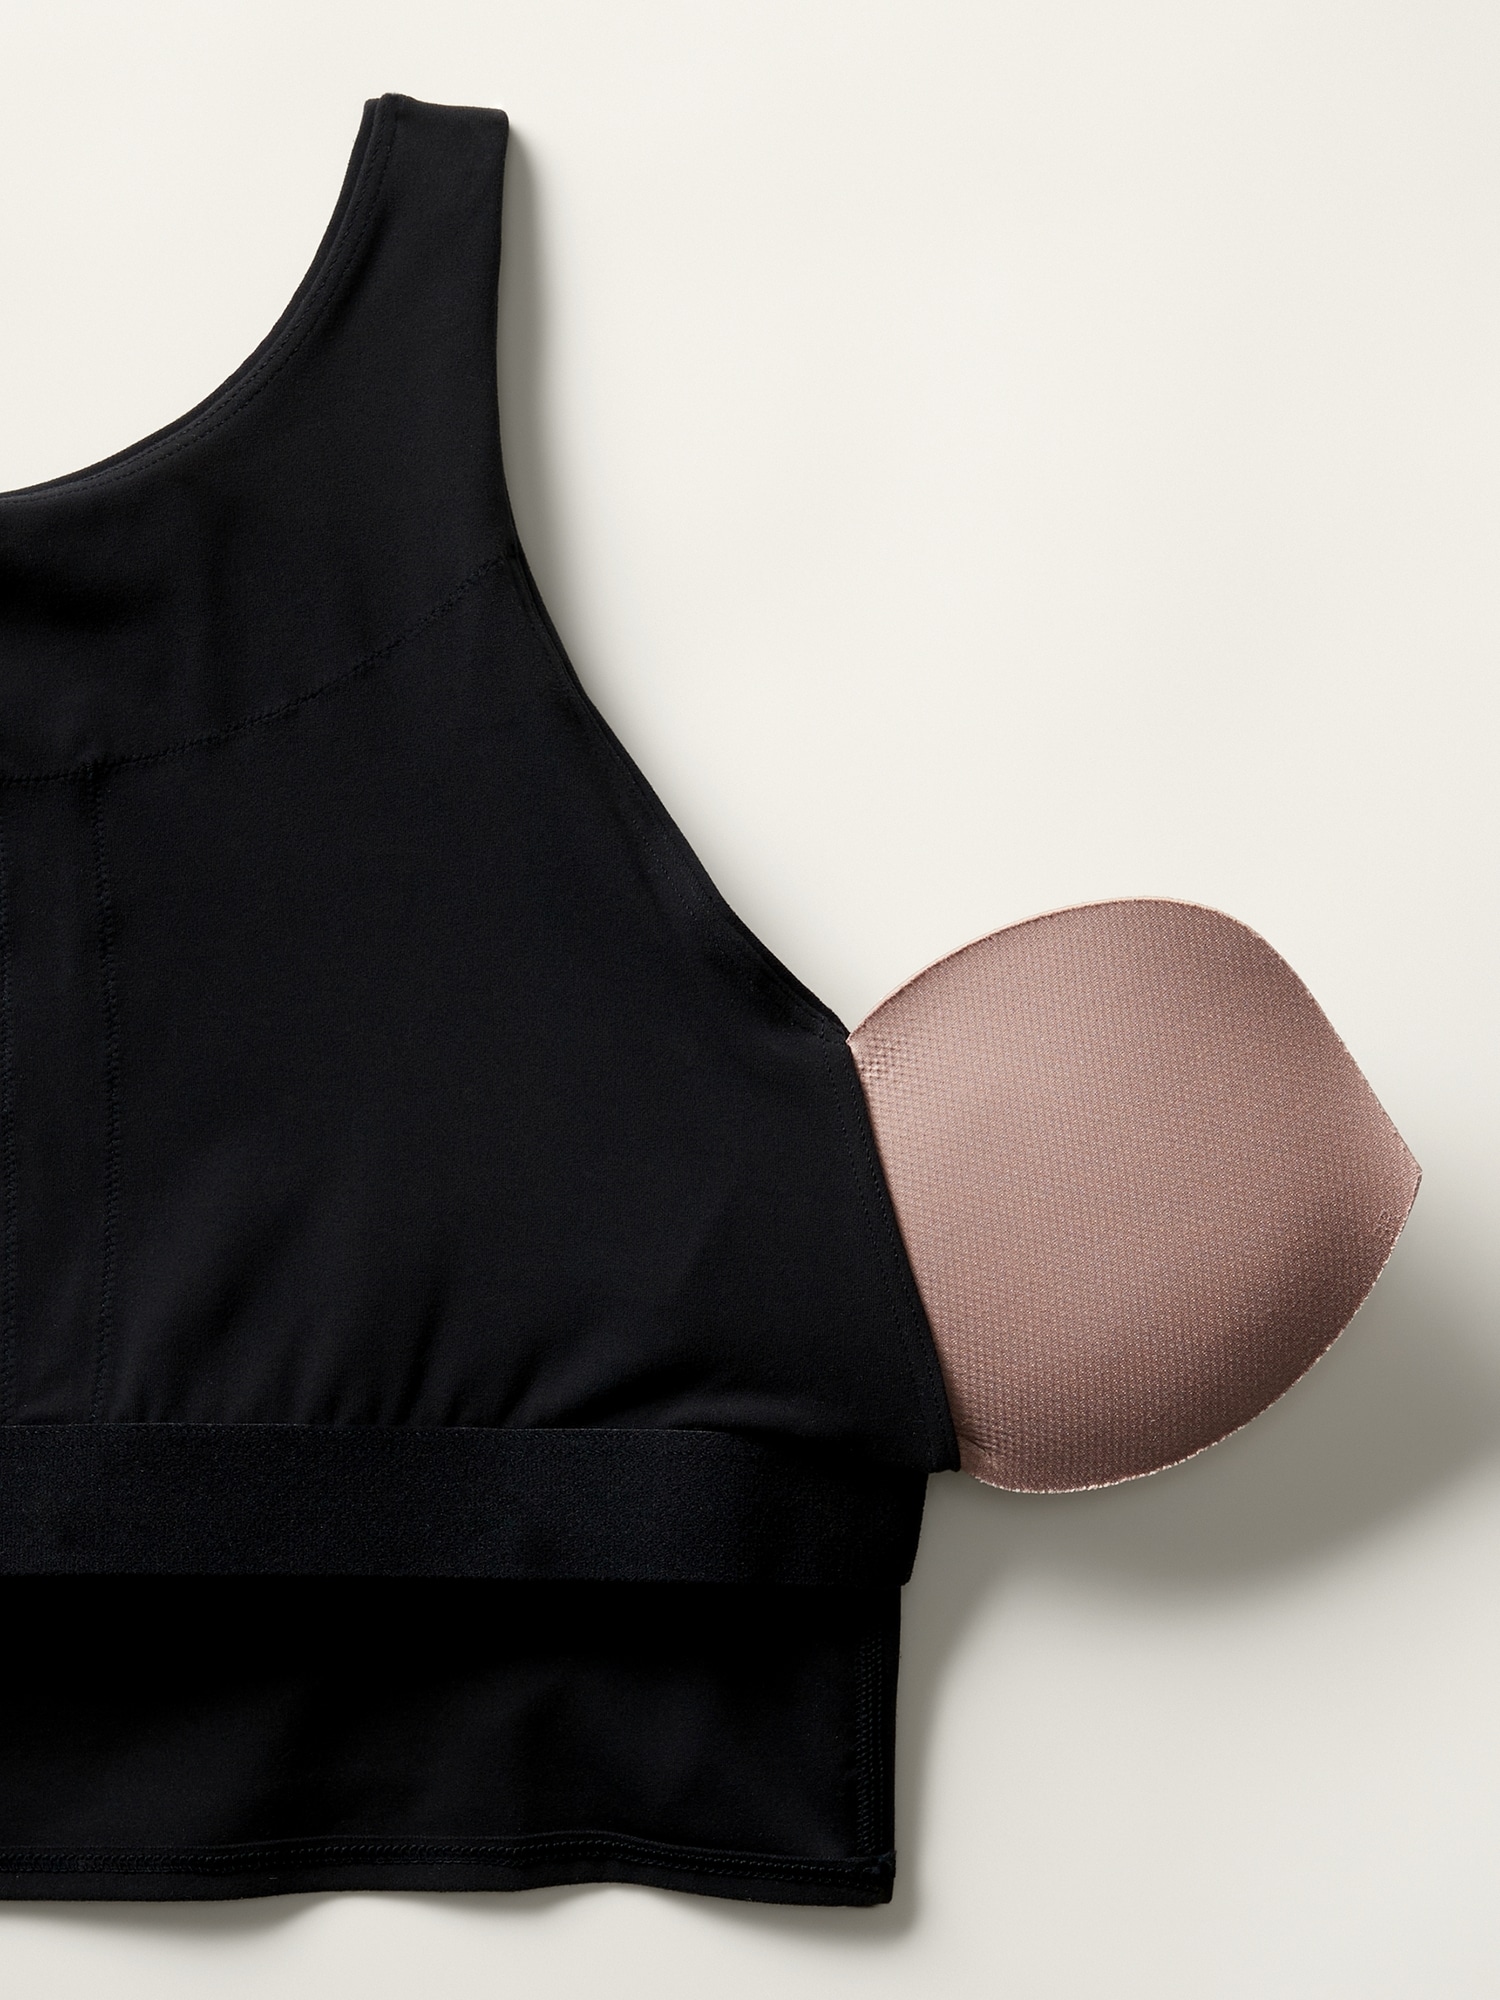 DSIRED Removable-inserts Mastectomy Bra in Black